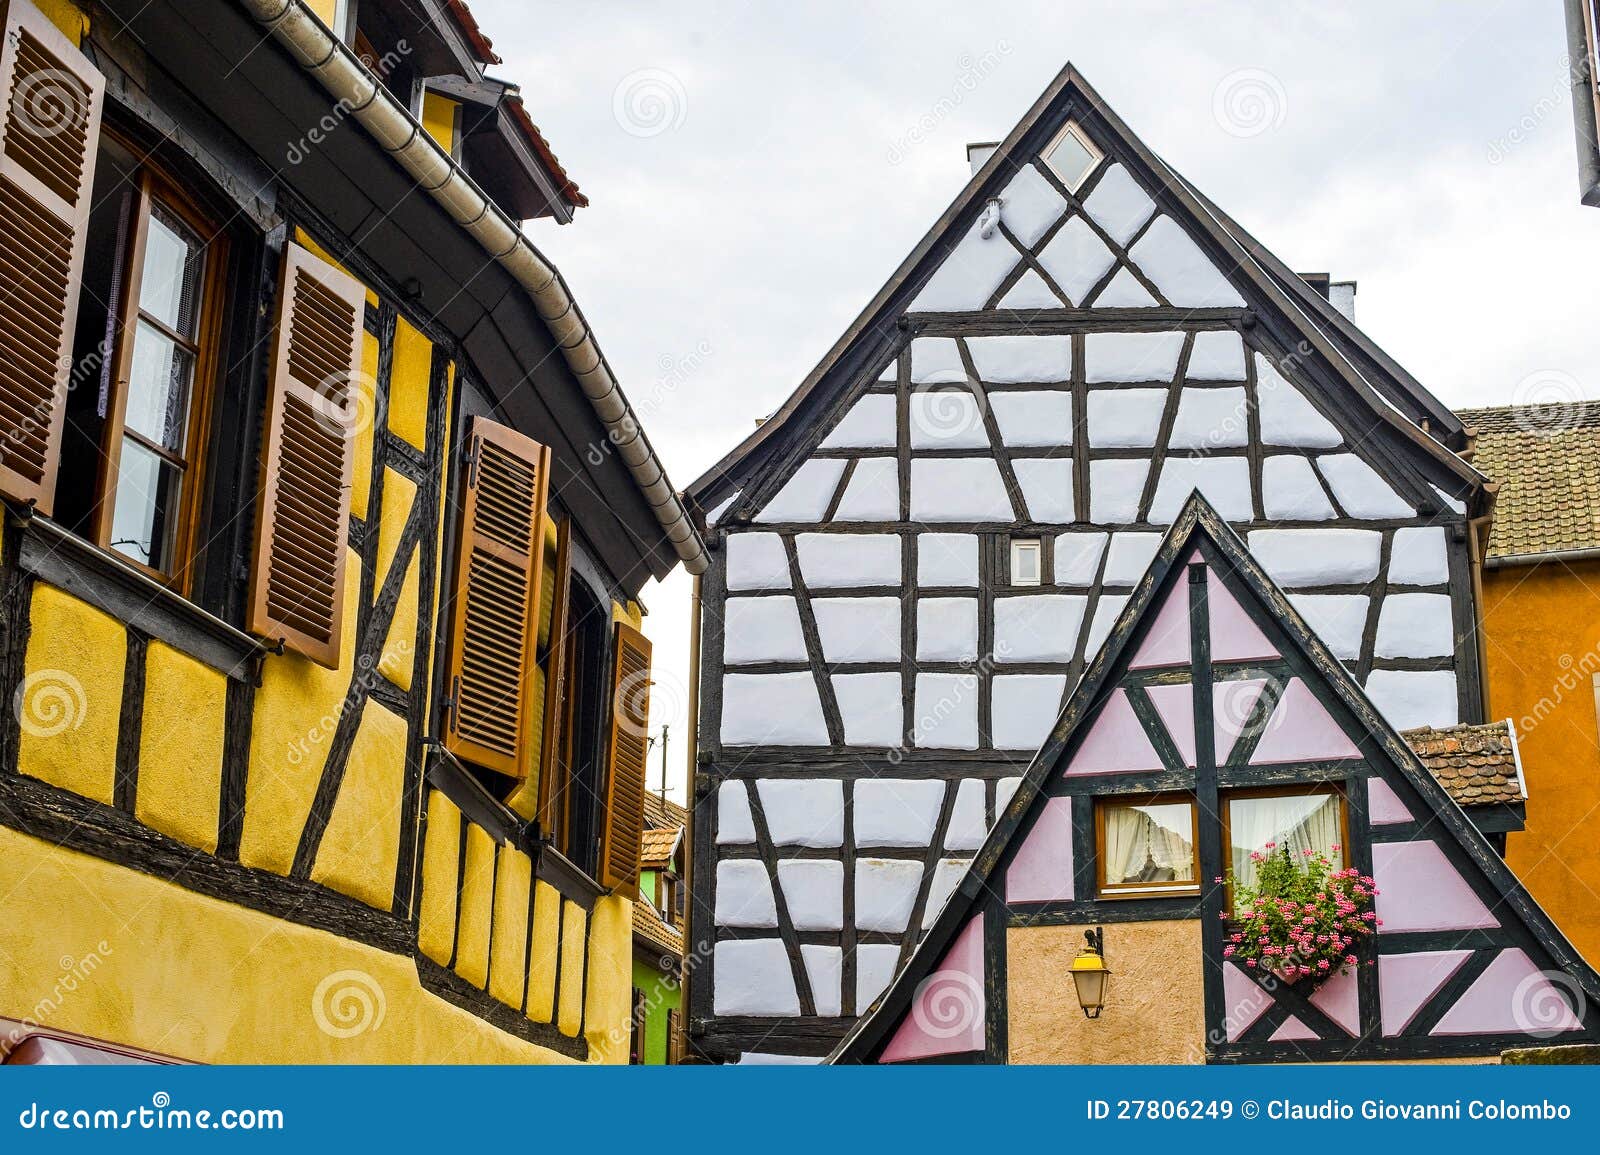 Ribeauville (Alsace) - Houses. Ribeauville (Bas-Rhin, Alsace, France) - Exterior of old half-timbered houses with flowers